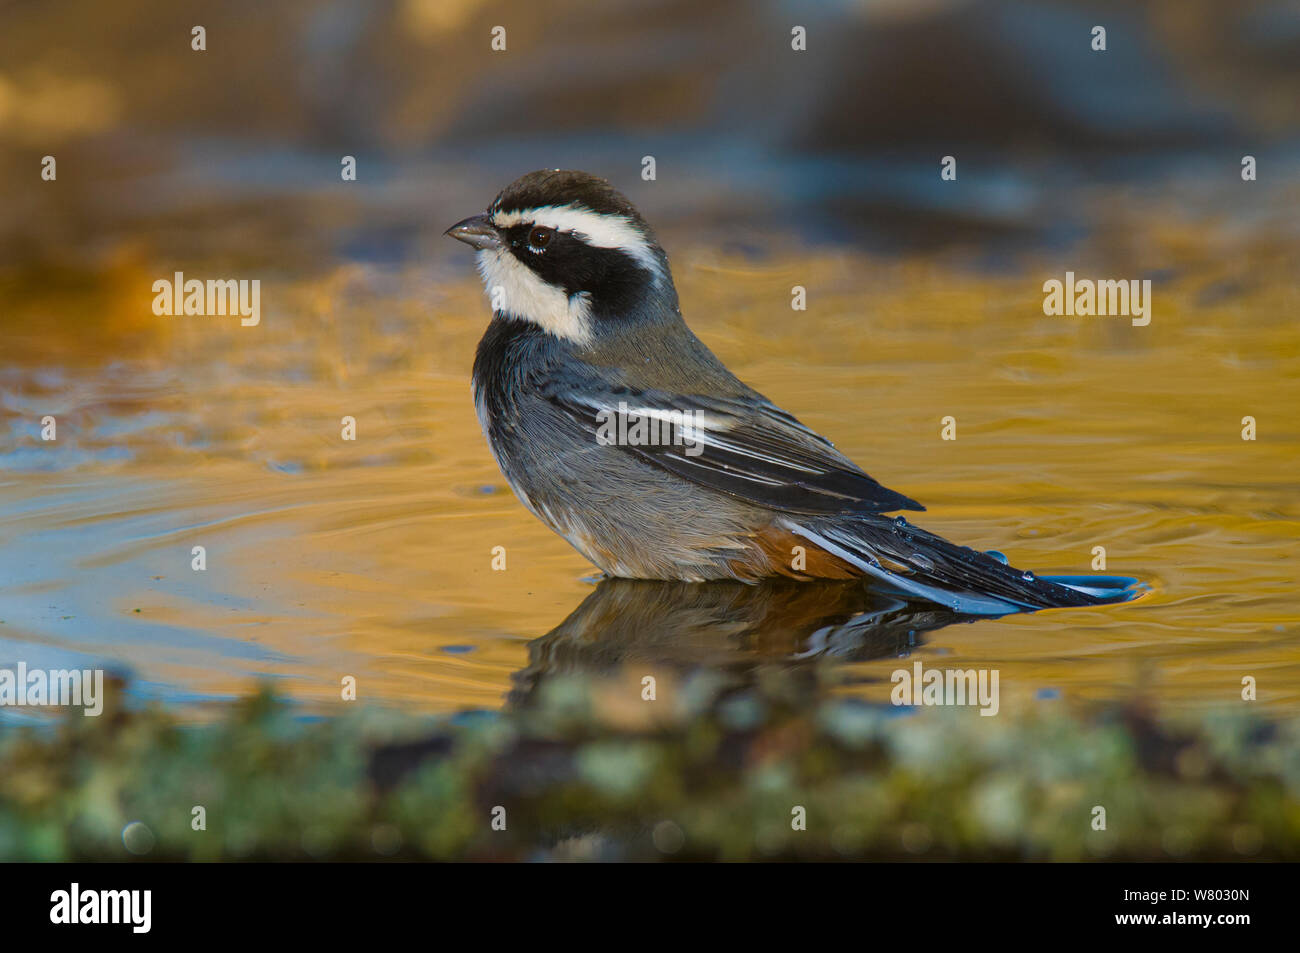 Ringed warbling finch (Poospiza torquata) bathing, Calden Forest , La Pampa, Argentina Stock Photo